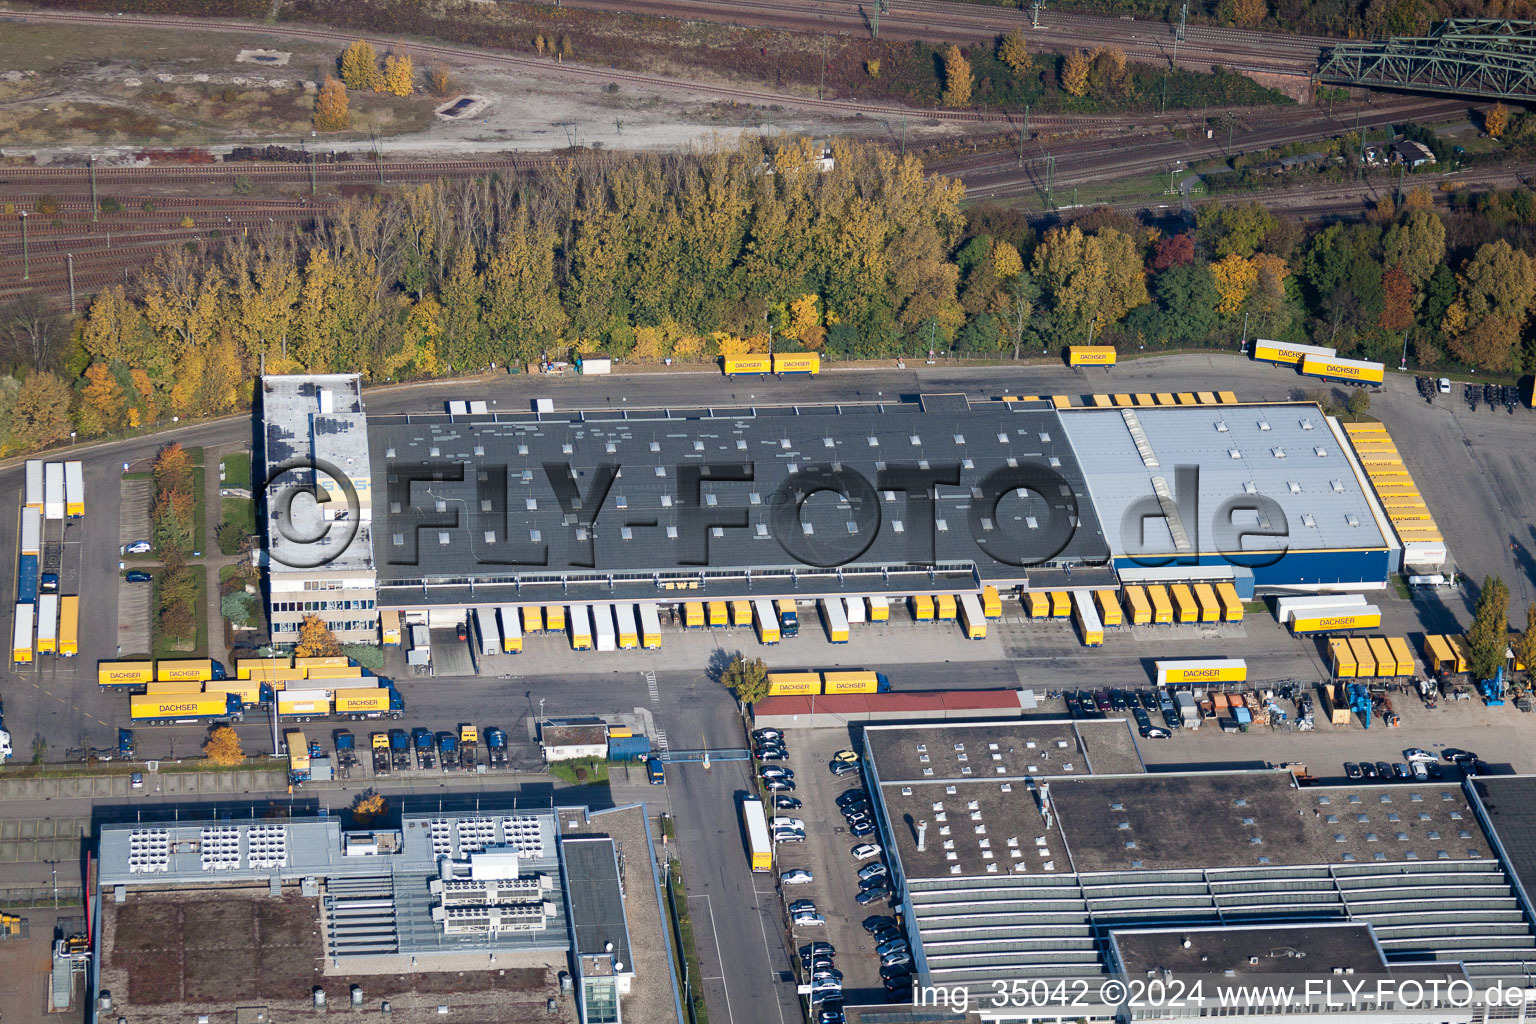 Warehouses and forwarding building SWS-Speditions-GmbH, Otto-street in the district Durlach in Karlsruhe in the state Baden-Wurttemberg from the plane